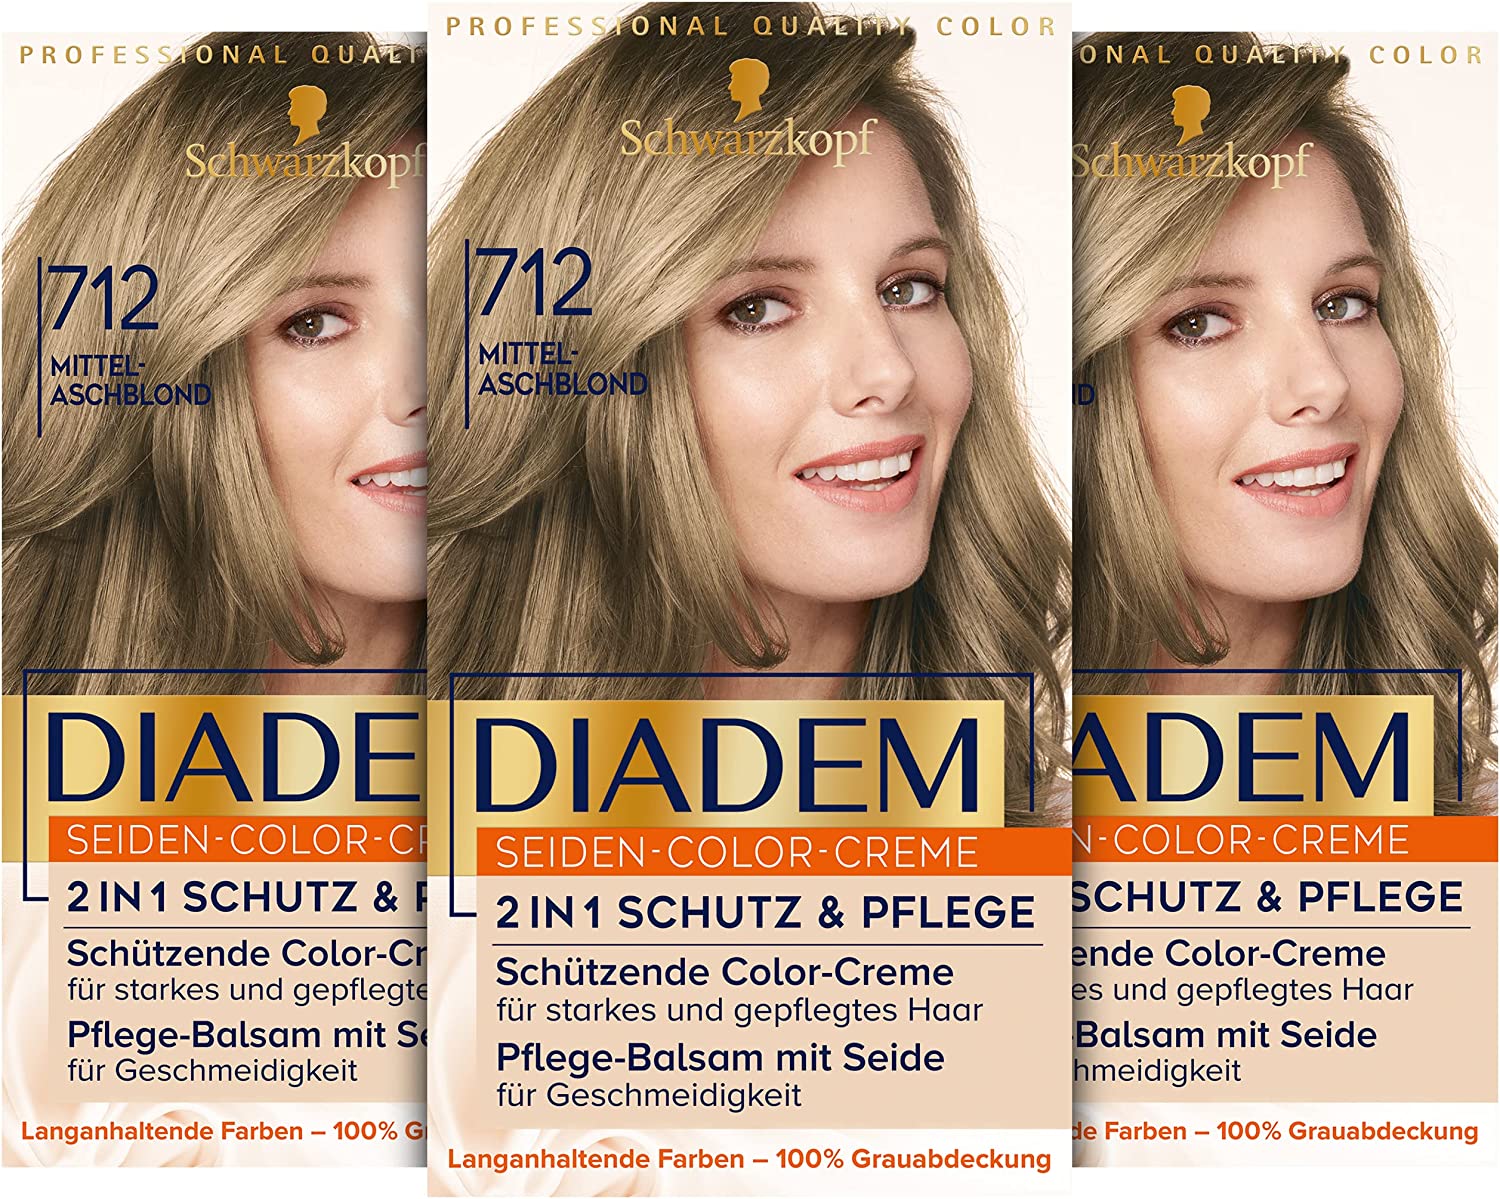 Diadem Silk Colour Cream 712 Medium Ash Blonde Level 3 (170 ml), Permanent Hair Colour with 2 in 1 Protection & Care for 70% Less Hair Breakage and Long-Lasting Colour Results, ‎medium